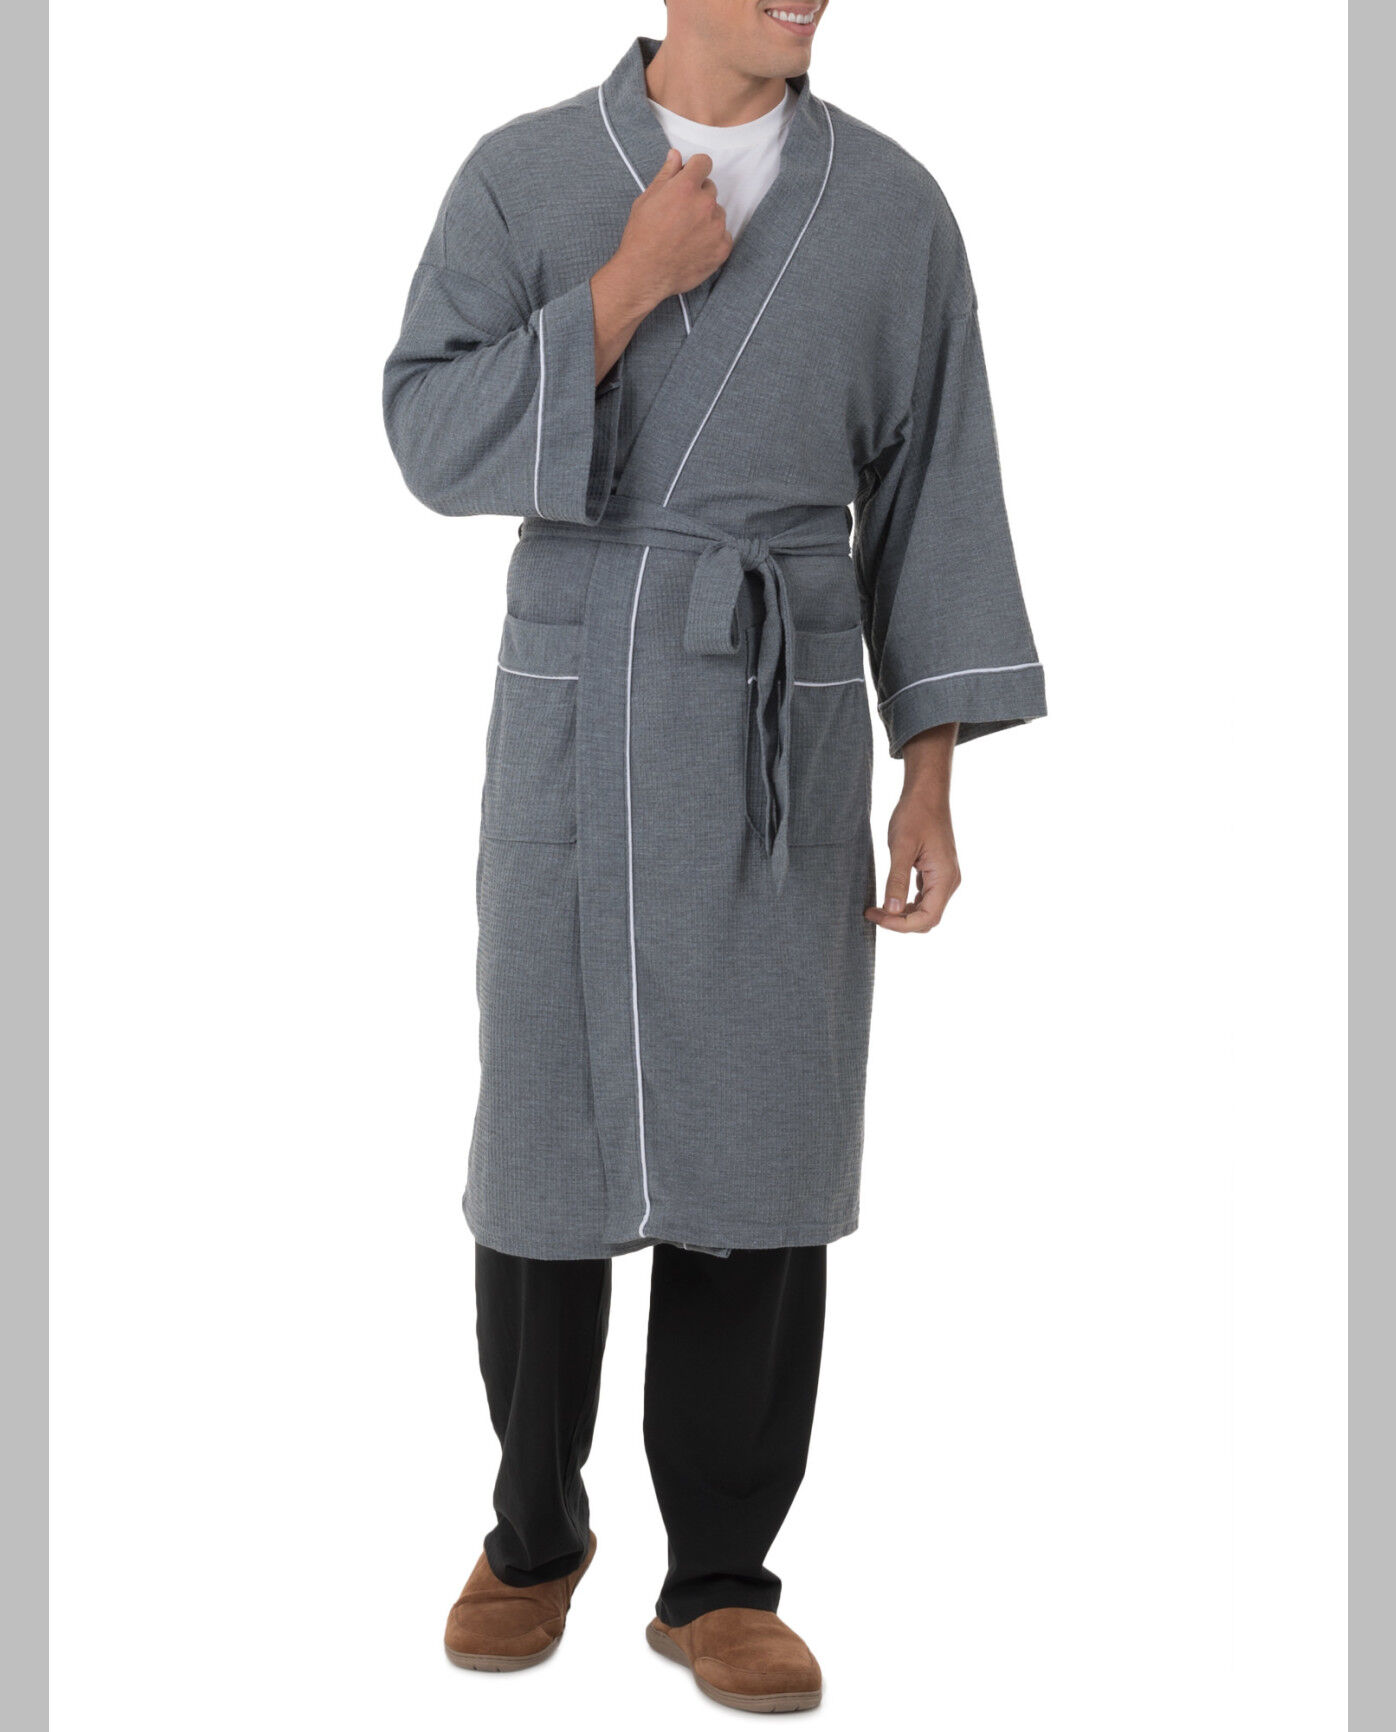 Men's Soft Touch Waffle Robe, 1 Pack, Size 2XL